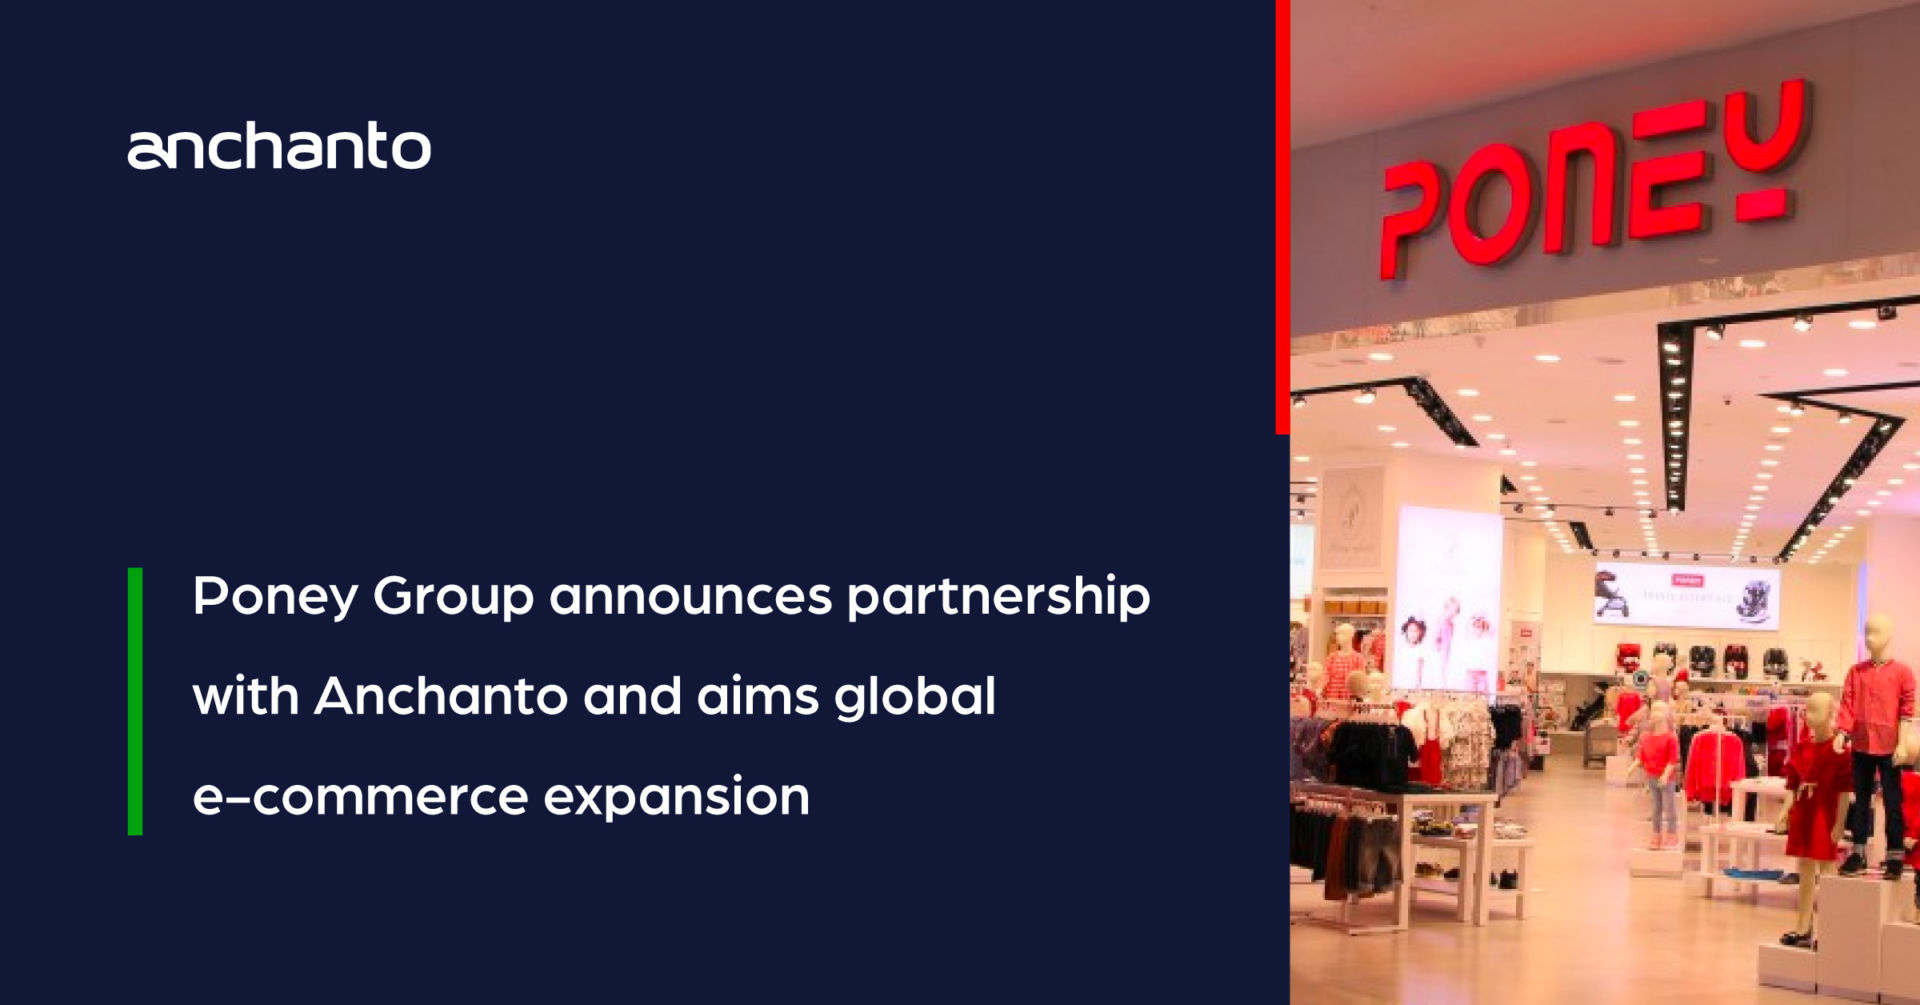 Poney Group announces Cross-border and Omnichannel expansion beyond Malaysia with Anchanto